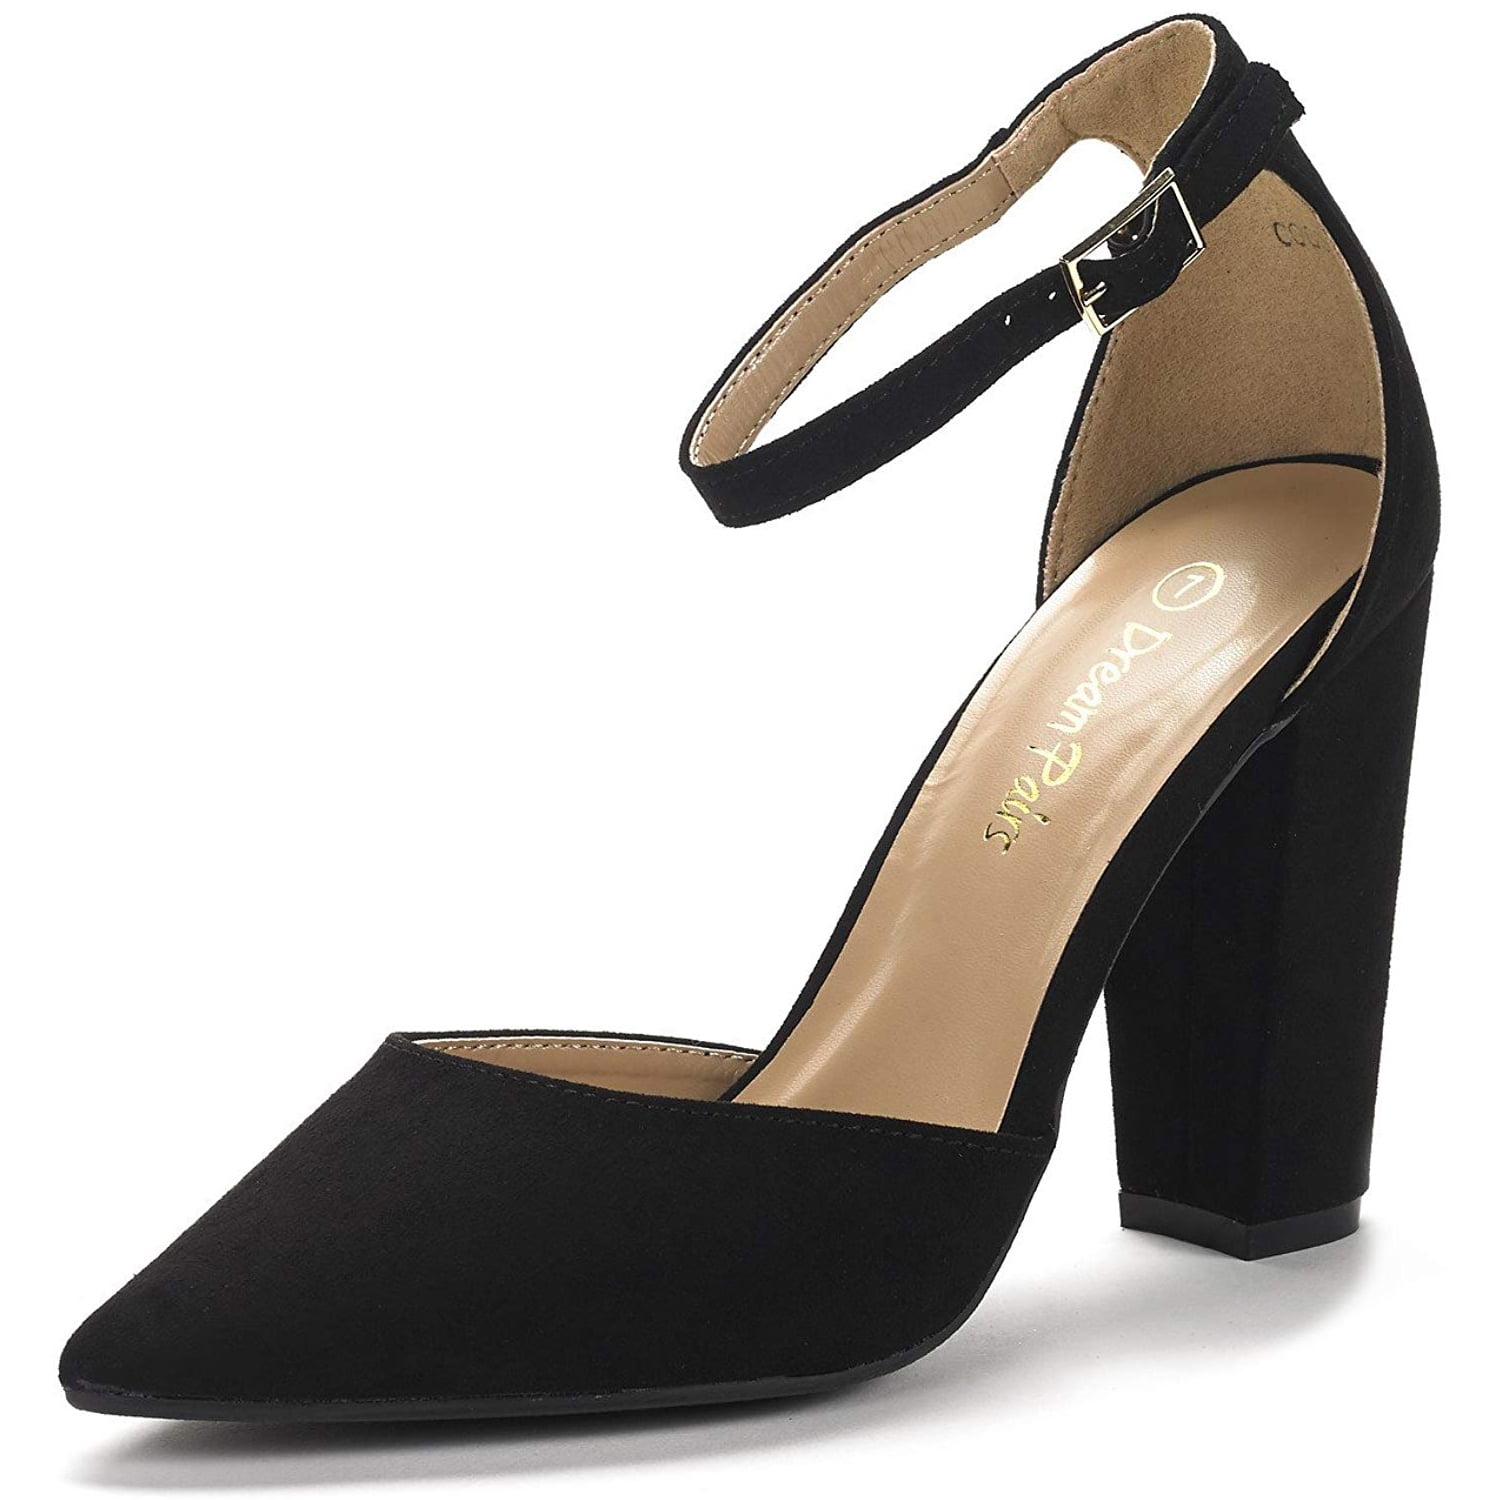 Pairs Women Ankle Strap Pump Shoes Pointed Toe High Chunky Dress Pump Shoes Coco Black/Suede Size 9 - Walmart.com